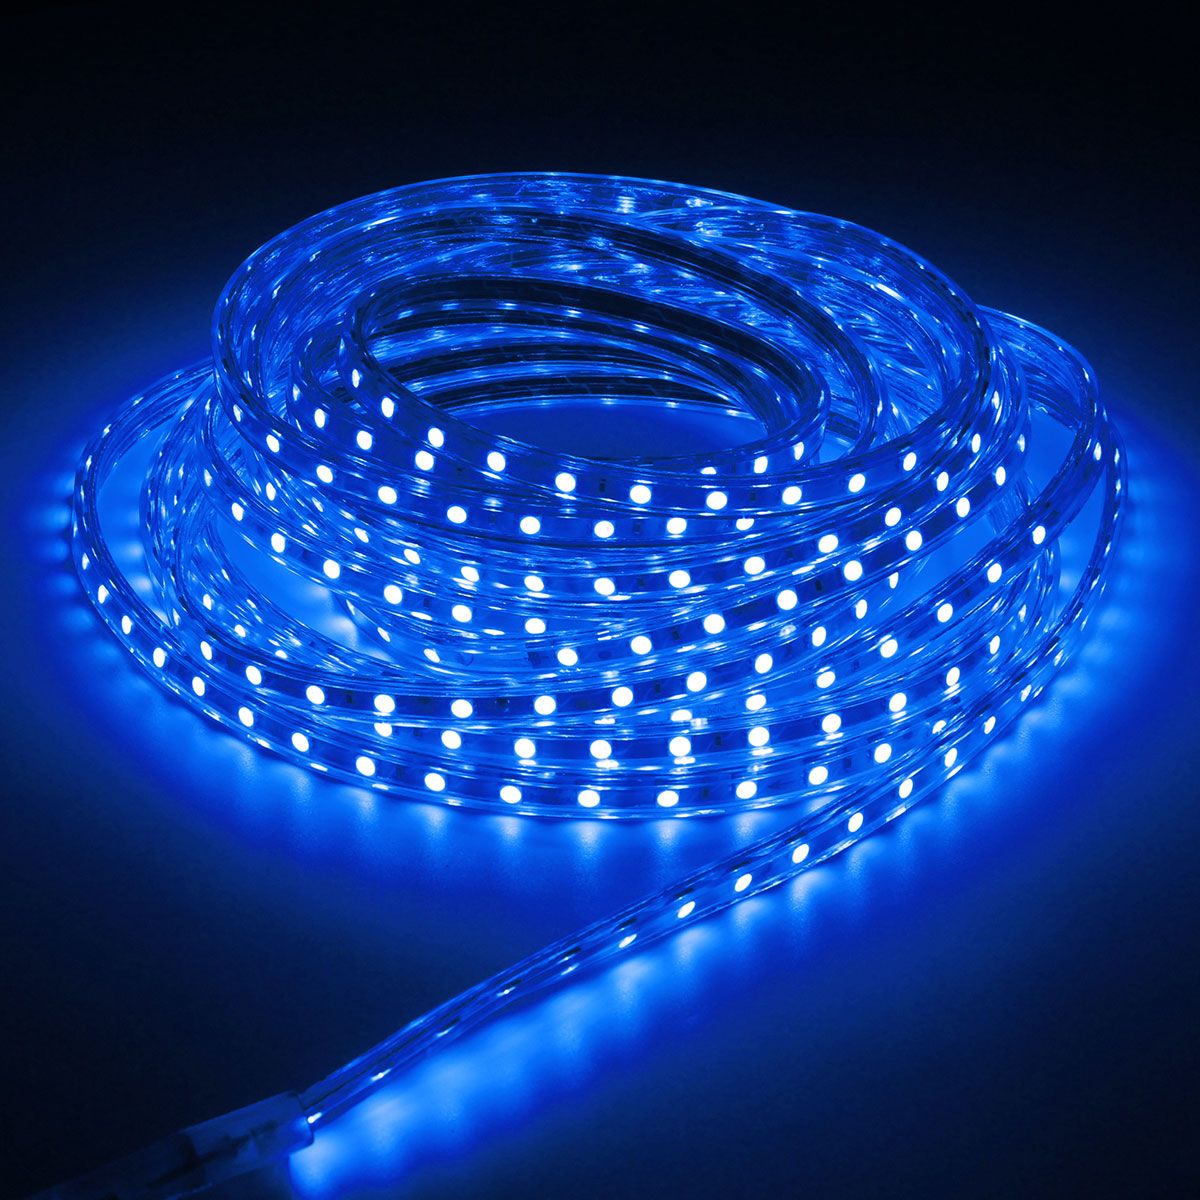 8M-5050-LED-SMD-Outdoor-Waterproof-Flexible-Tape-Rope-Strip-Light-Xmas-220V-1066360